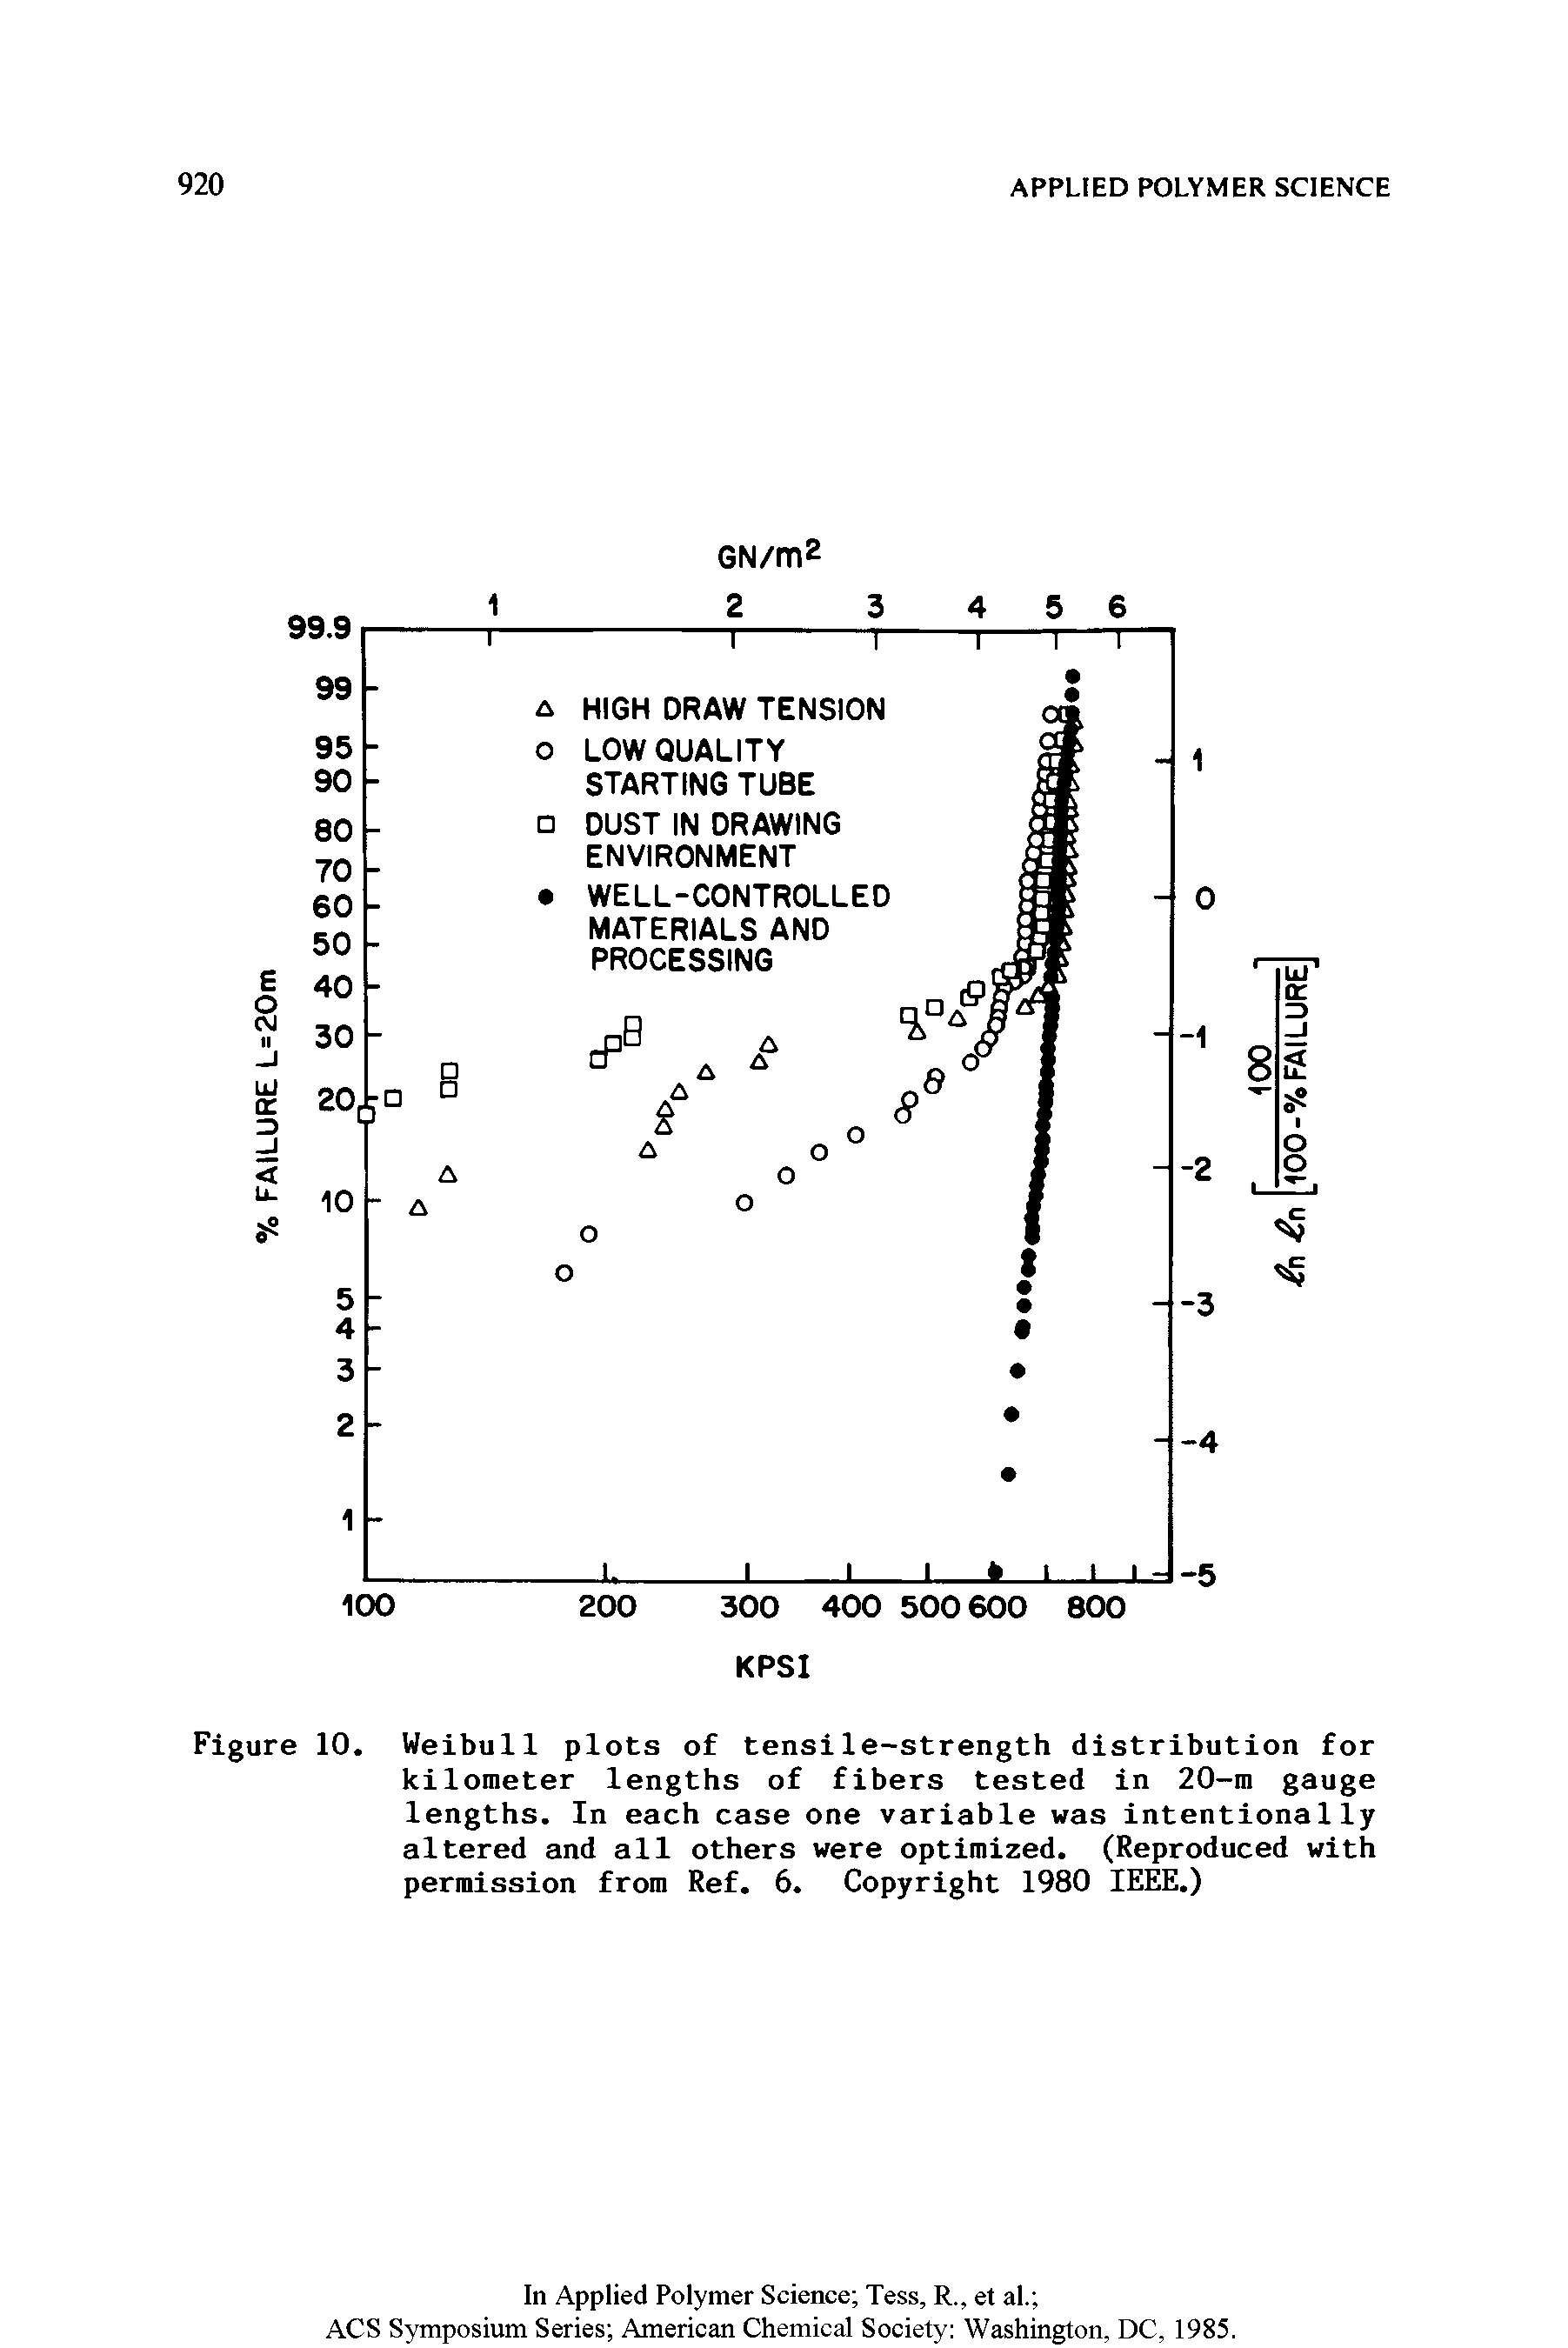 Figure 10. Weibull plots of tensile-strength distribution for kilometer lengths of fibers tested in 20-m gauge lengths. In each case one variable was intentionally altered and all others were optimized. (Reproduced with permission from Ref. 6. Copyright 1980 IEEE.)...